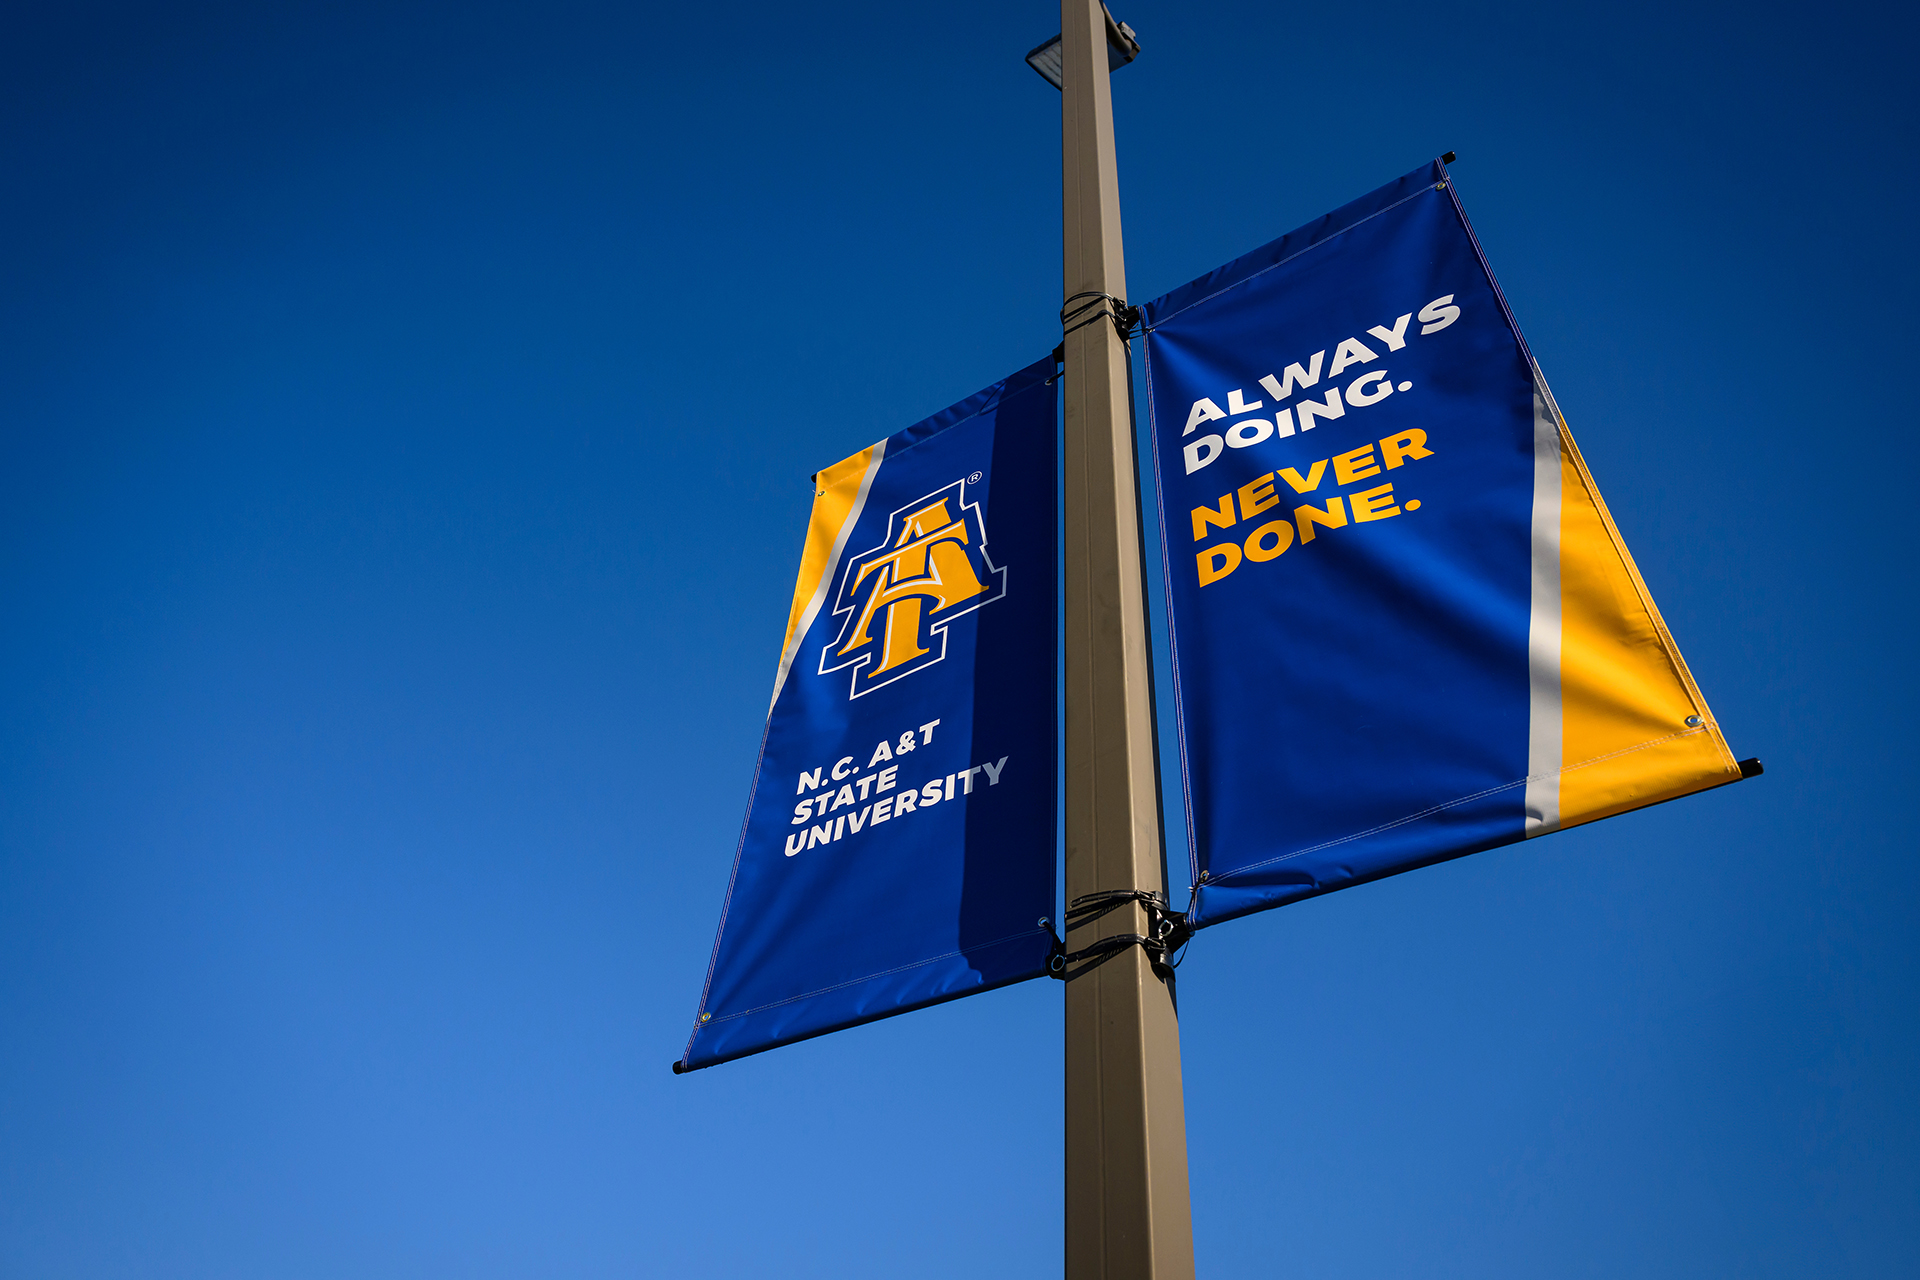 NC A&T Signage - Always doing, Never Done